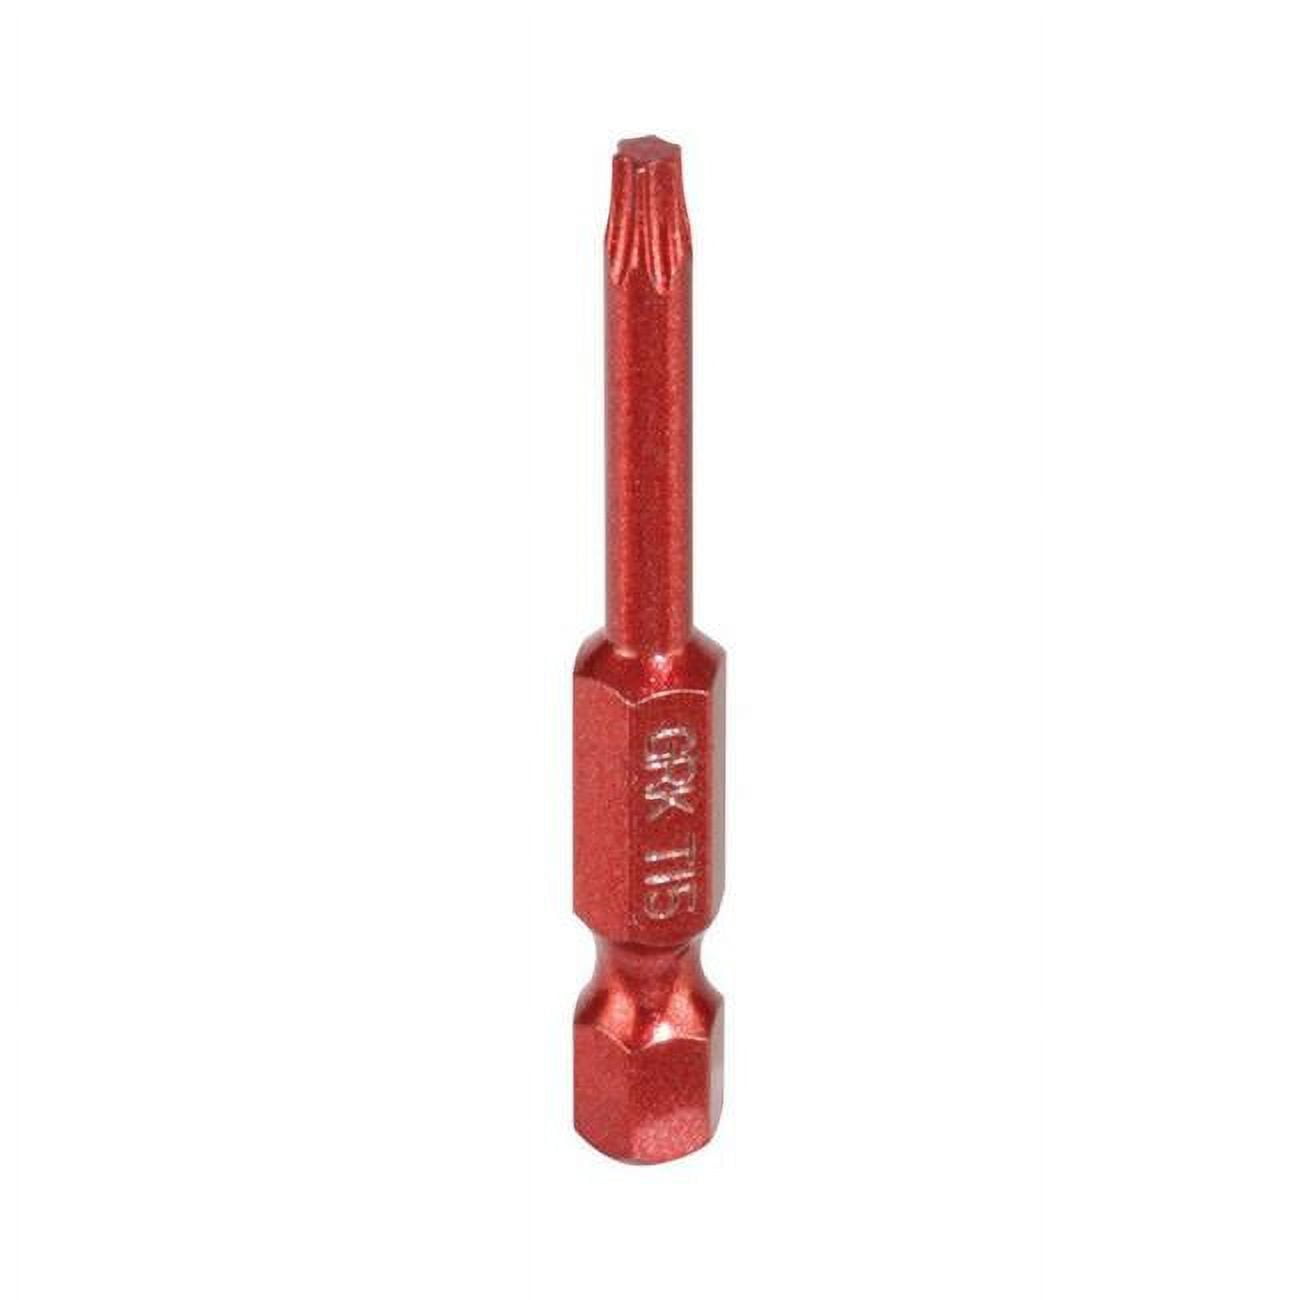 Picture of GRK Fasteners 2824696 T-15 x 2 in. Star Carbon Steel 0.25 in. Hex Shank Impact Power Bit - 25 Piece